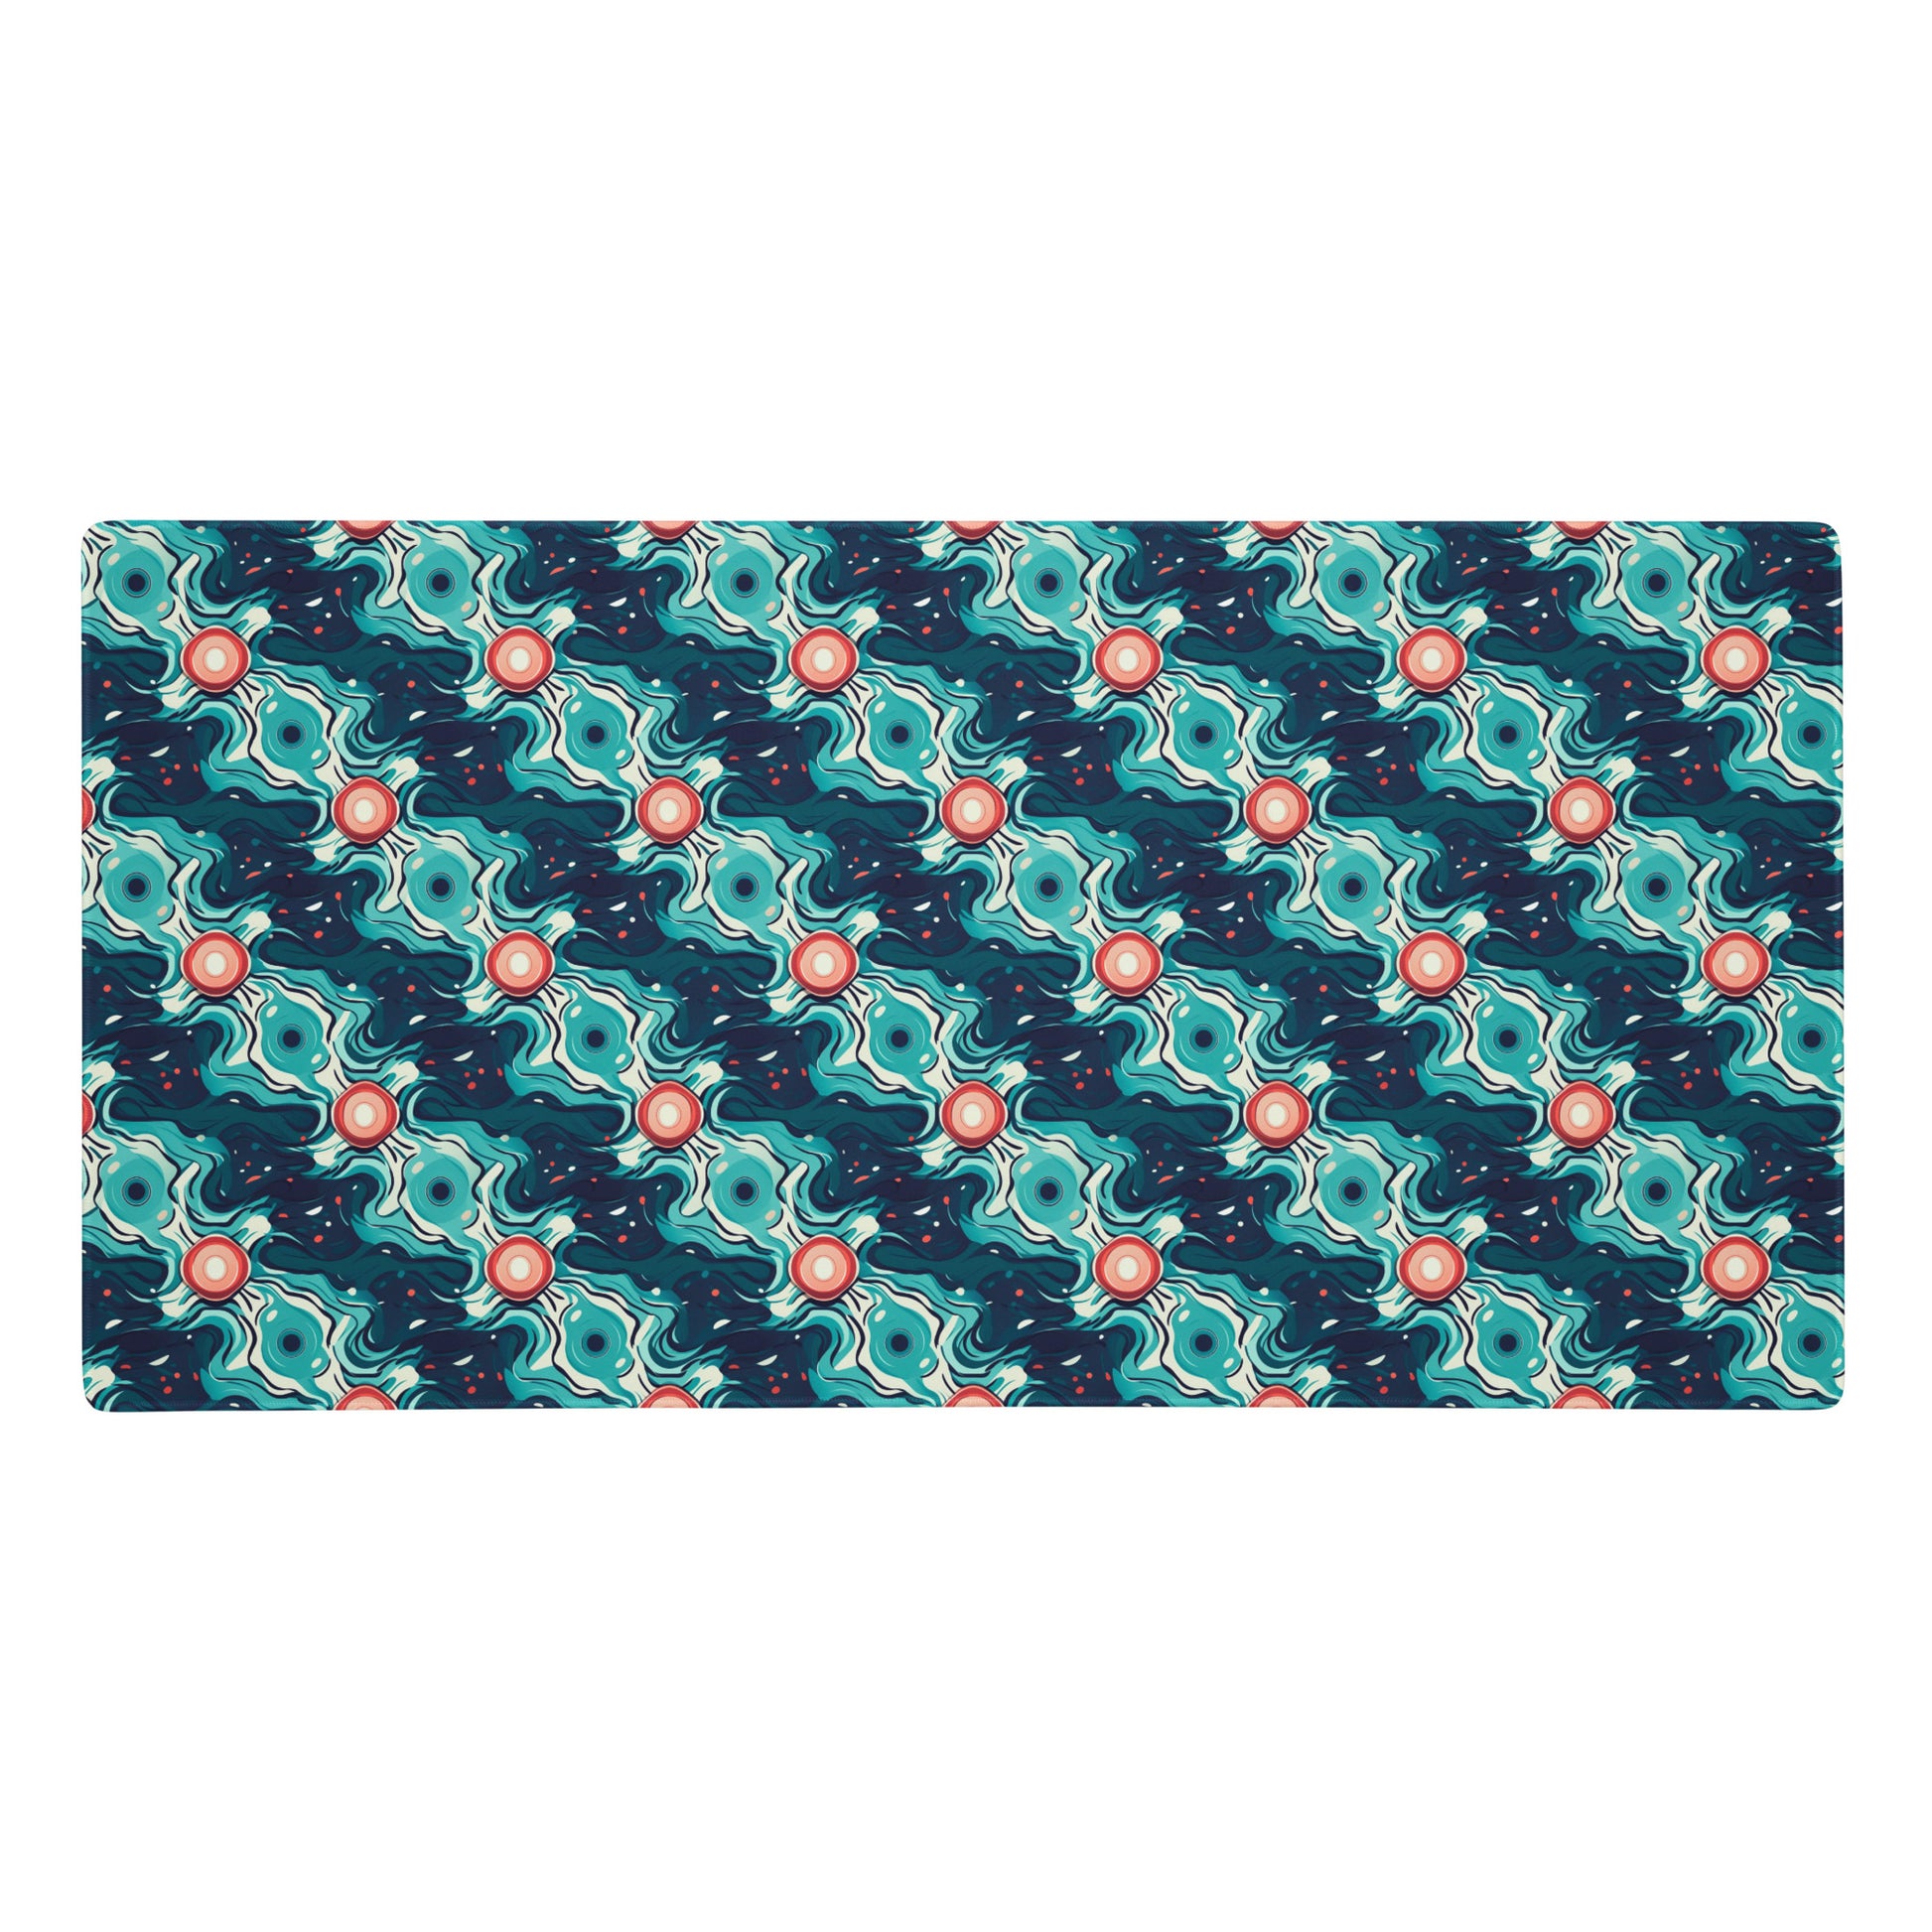 A 36" x 18" desk pad with a teal abstract wavy pattern.